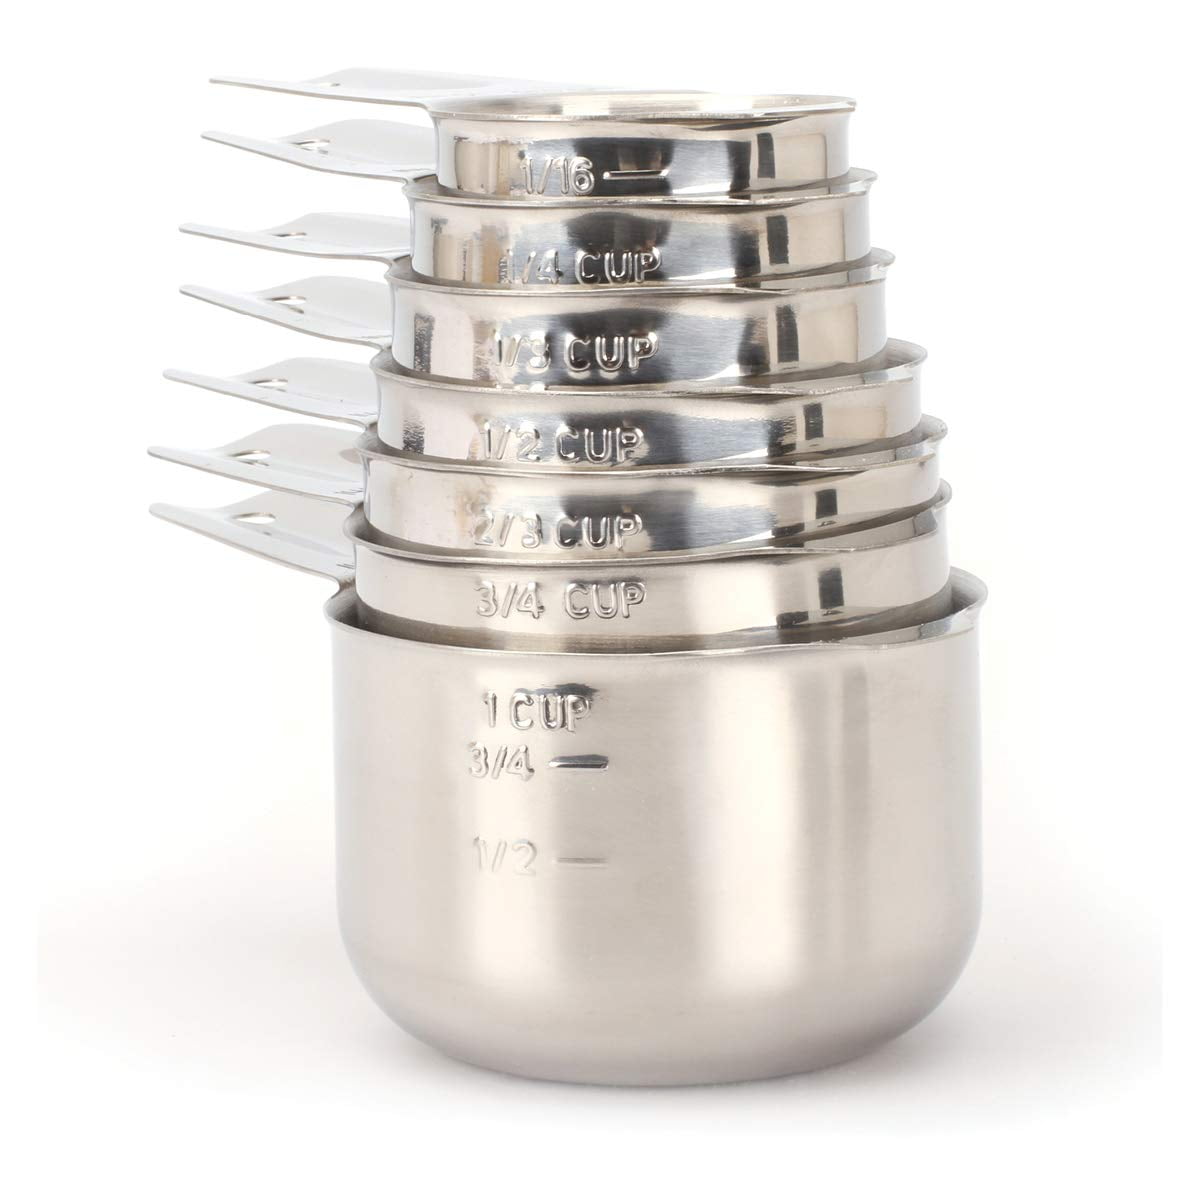 Commercial Quality Stainless Steel Measuring Cups (8-piece Set